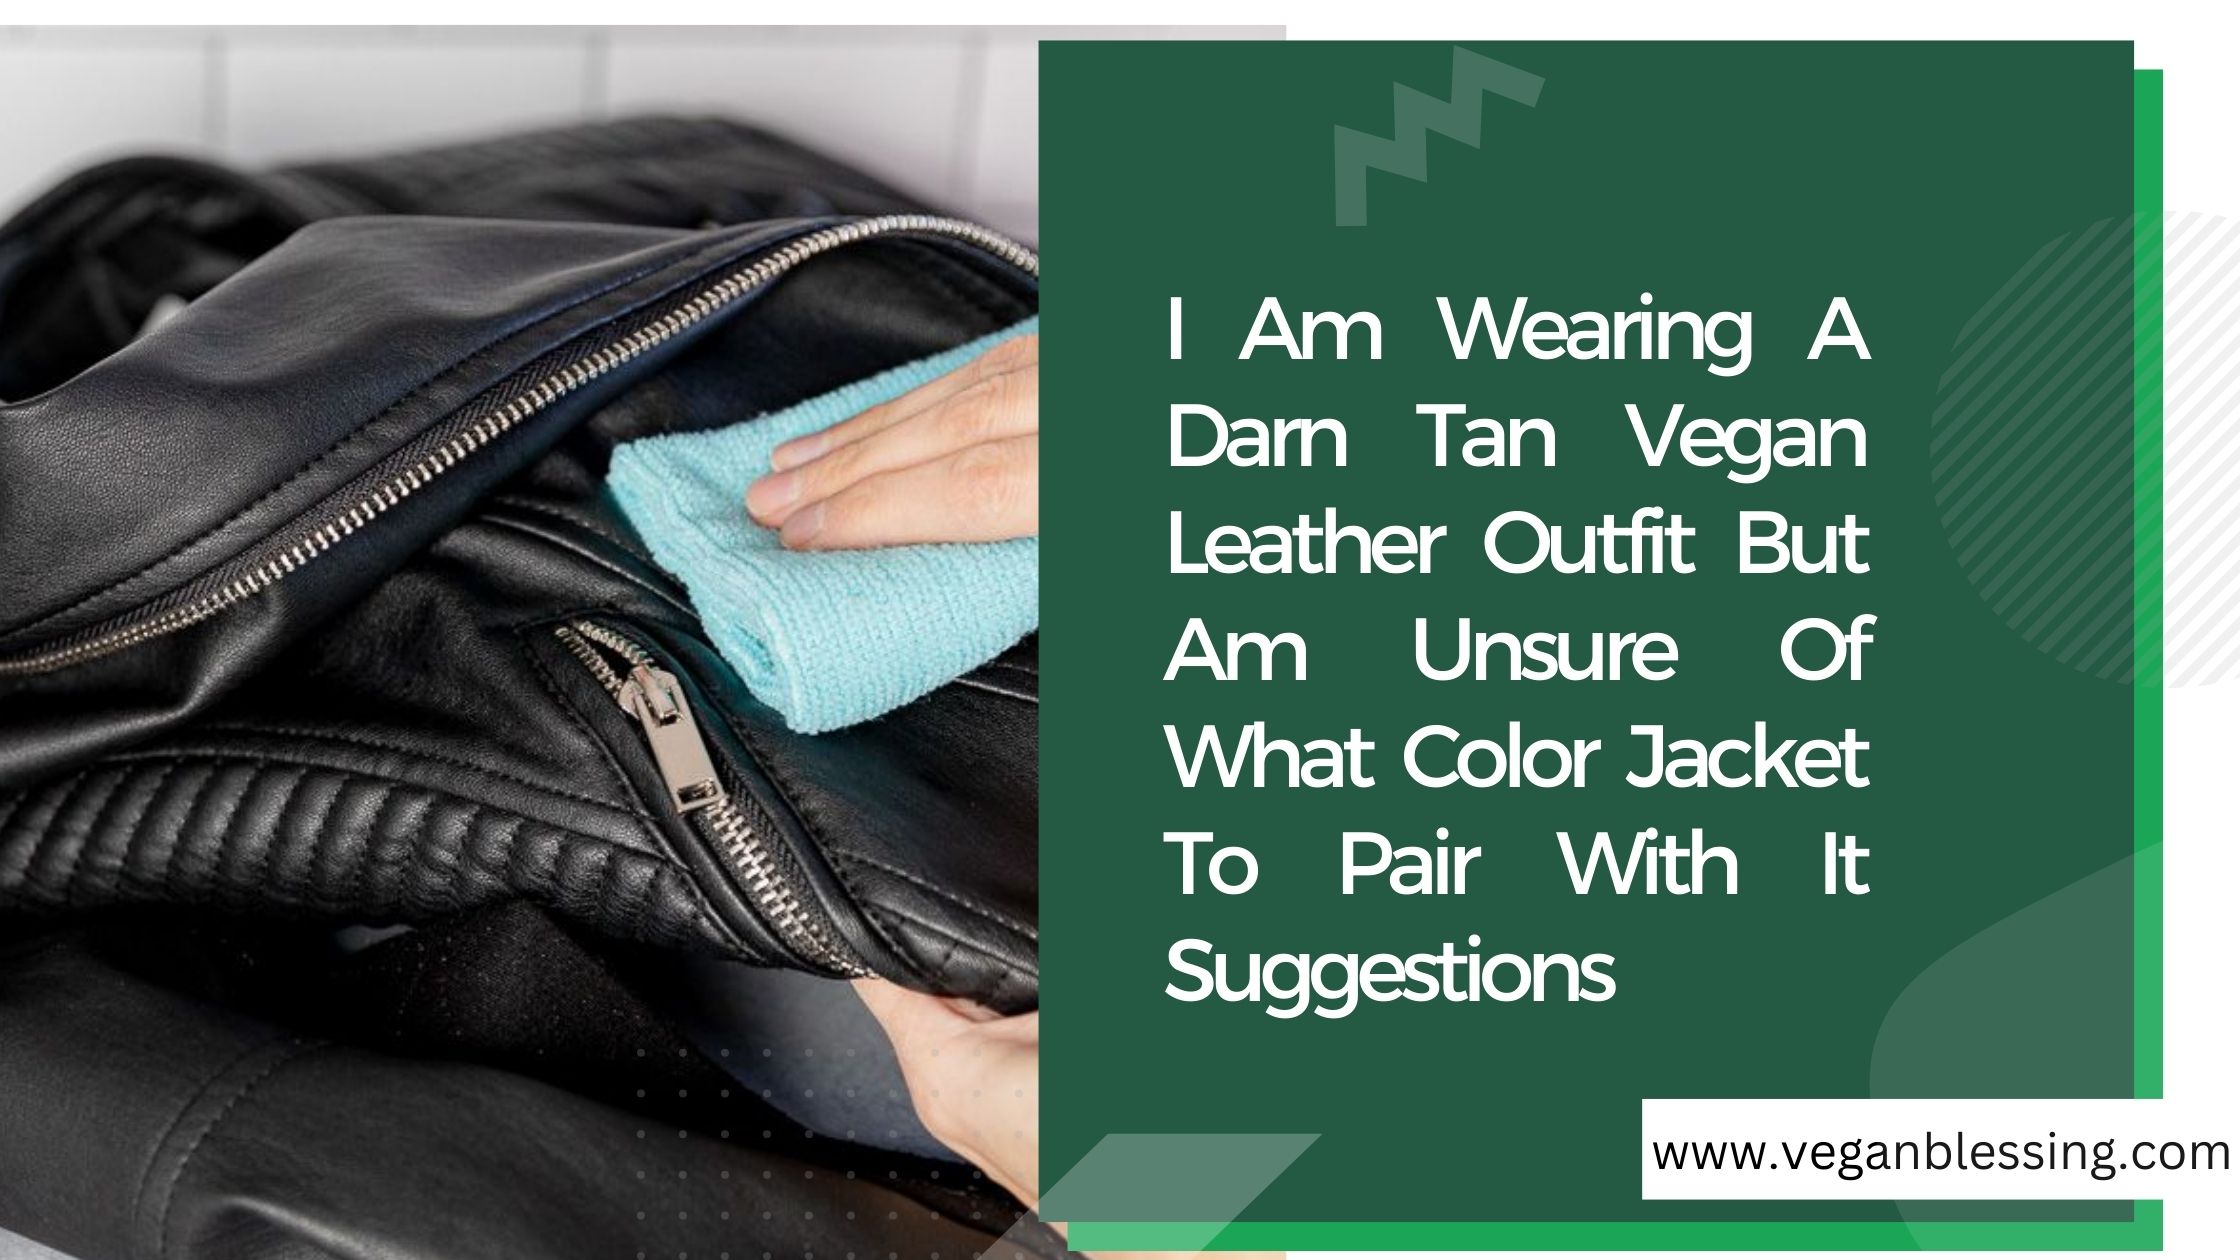 I Am Wearing A Darn Tan Vegan Leather Outfit But Am Unsure Of What Color Jacket To Pair With It Suggestions I Am Wearing A Darn Tan Vegan Leather Outfit But Am Unsure Of What Color Jacket To Pair With It Suggestions